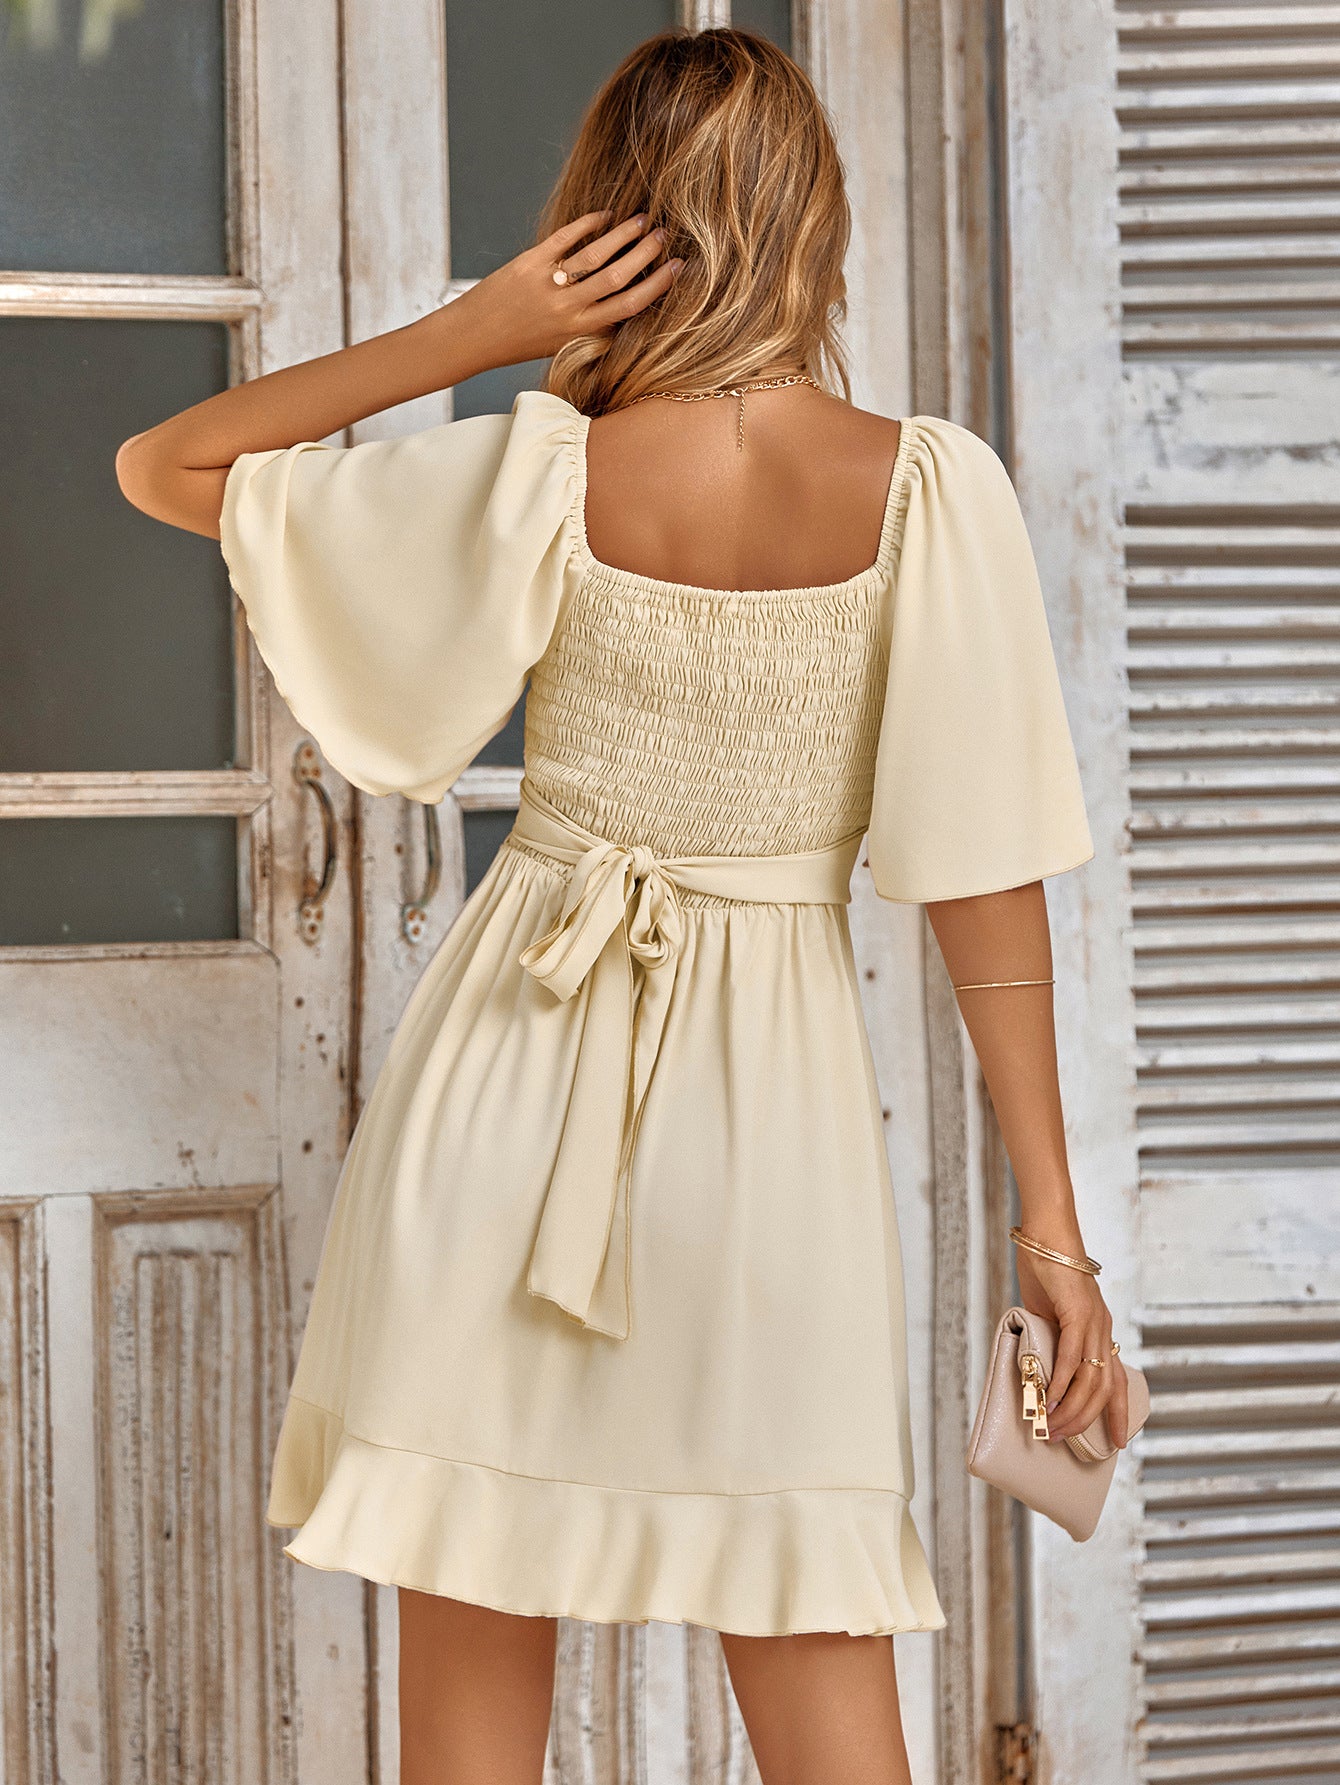 Mini Surplice Dress' highlighting a short, wrap-style dress with a surplice neckline, creating a flattering and stylish look.